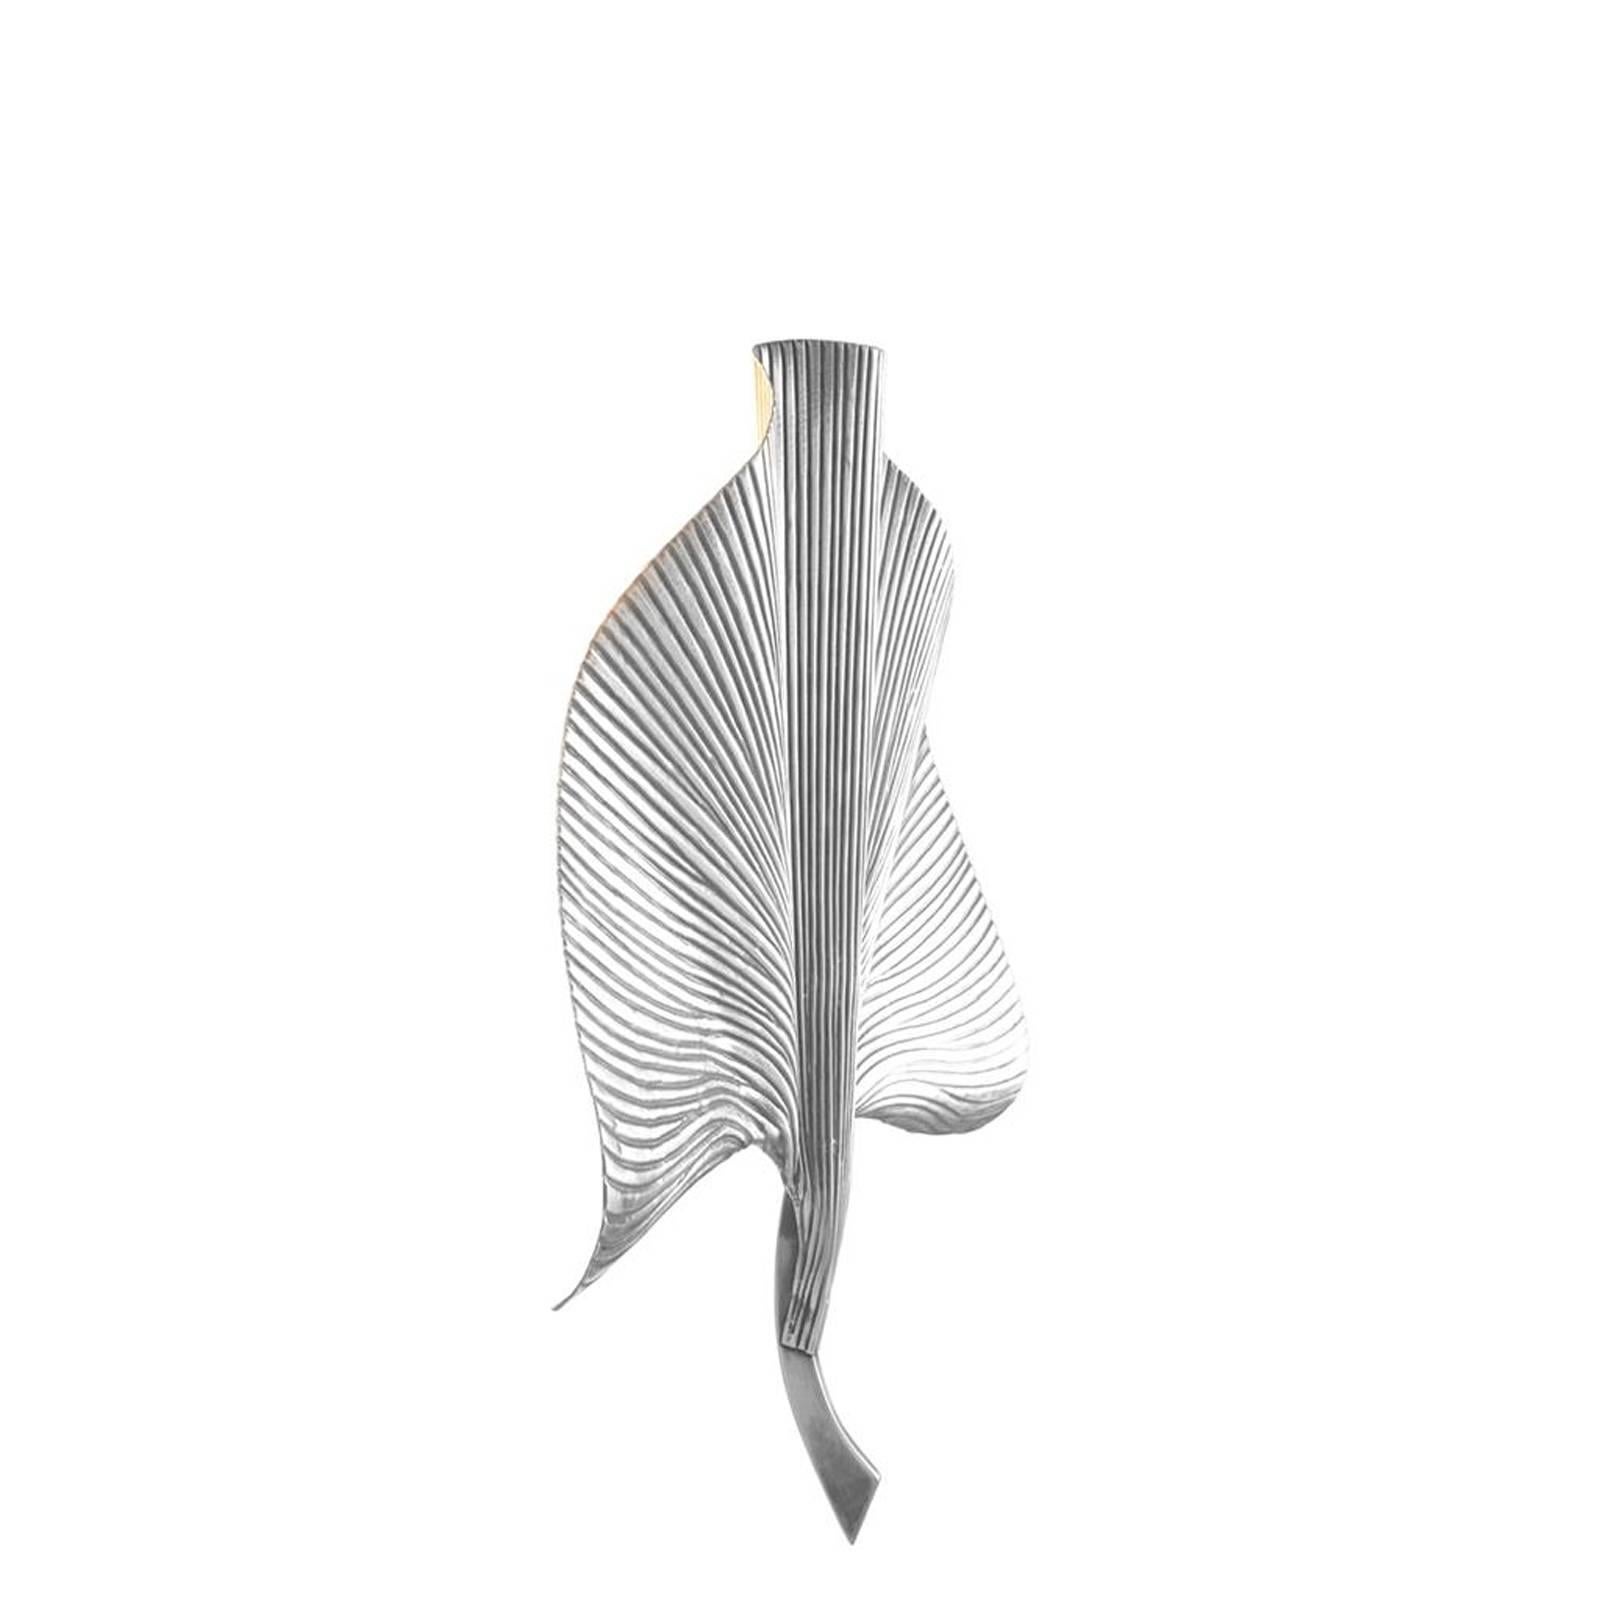 Ginko Biloba Wall Lamp in Tarnished Silver Plated Finish In Excellent Condition For Sale In Paris, FR